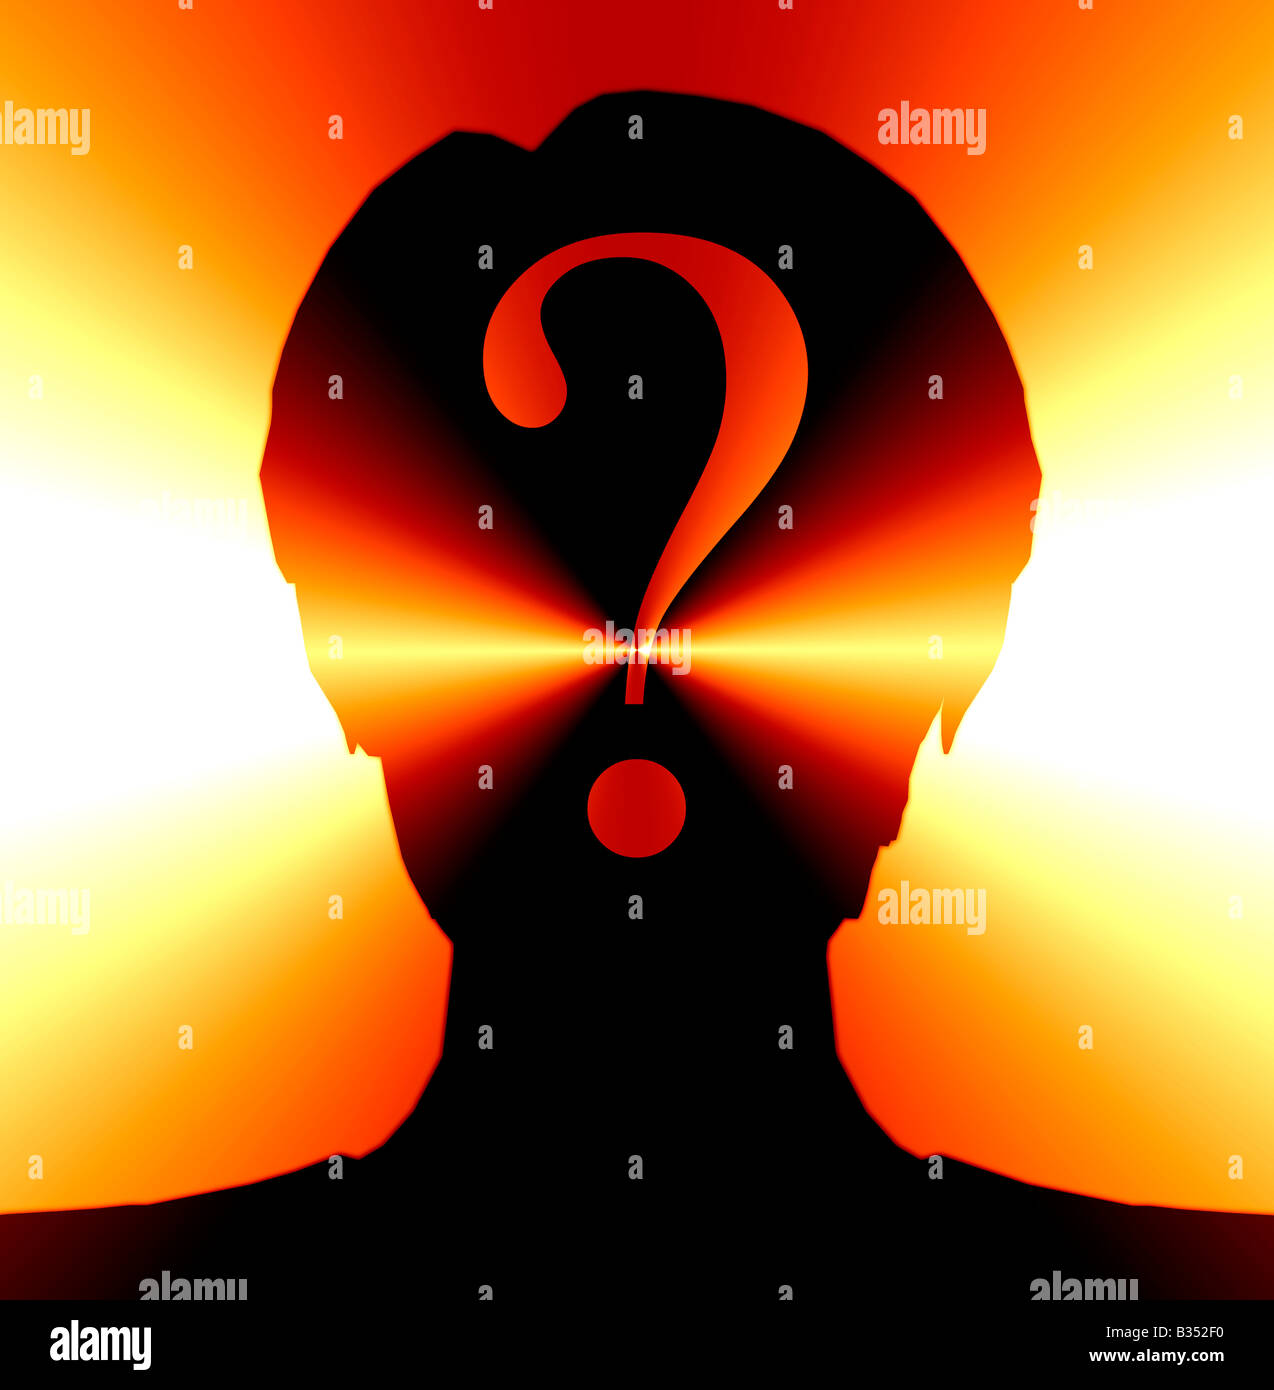 abstract silhouette of female head with question mark composited over face Stock Photo